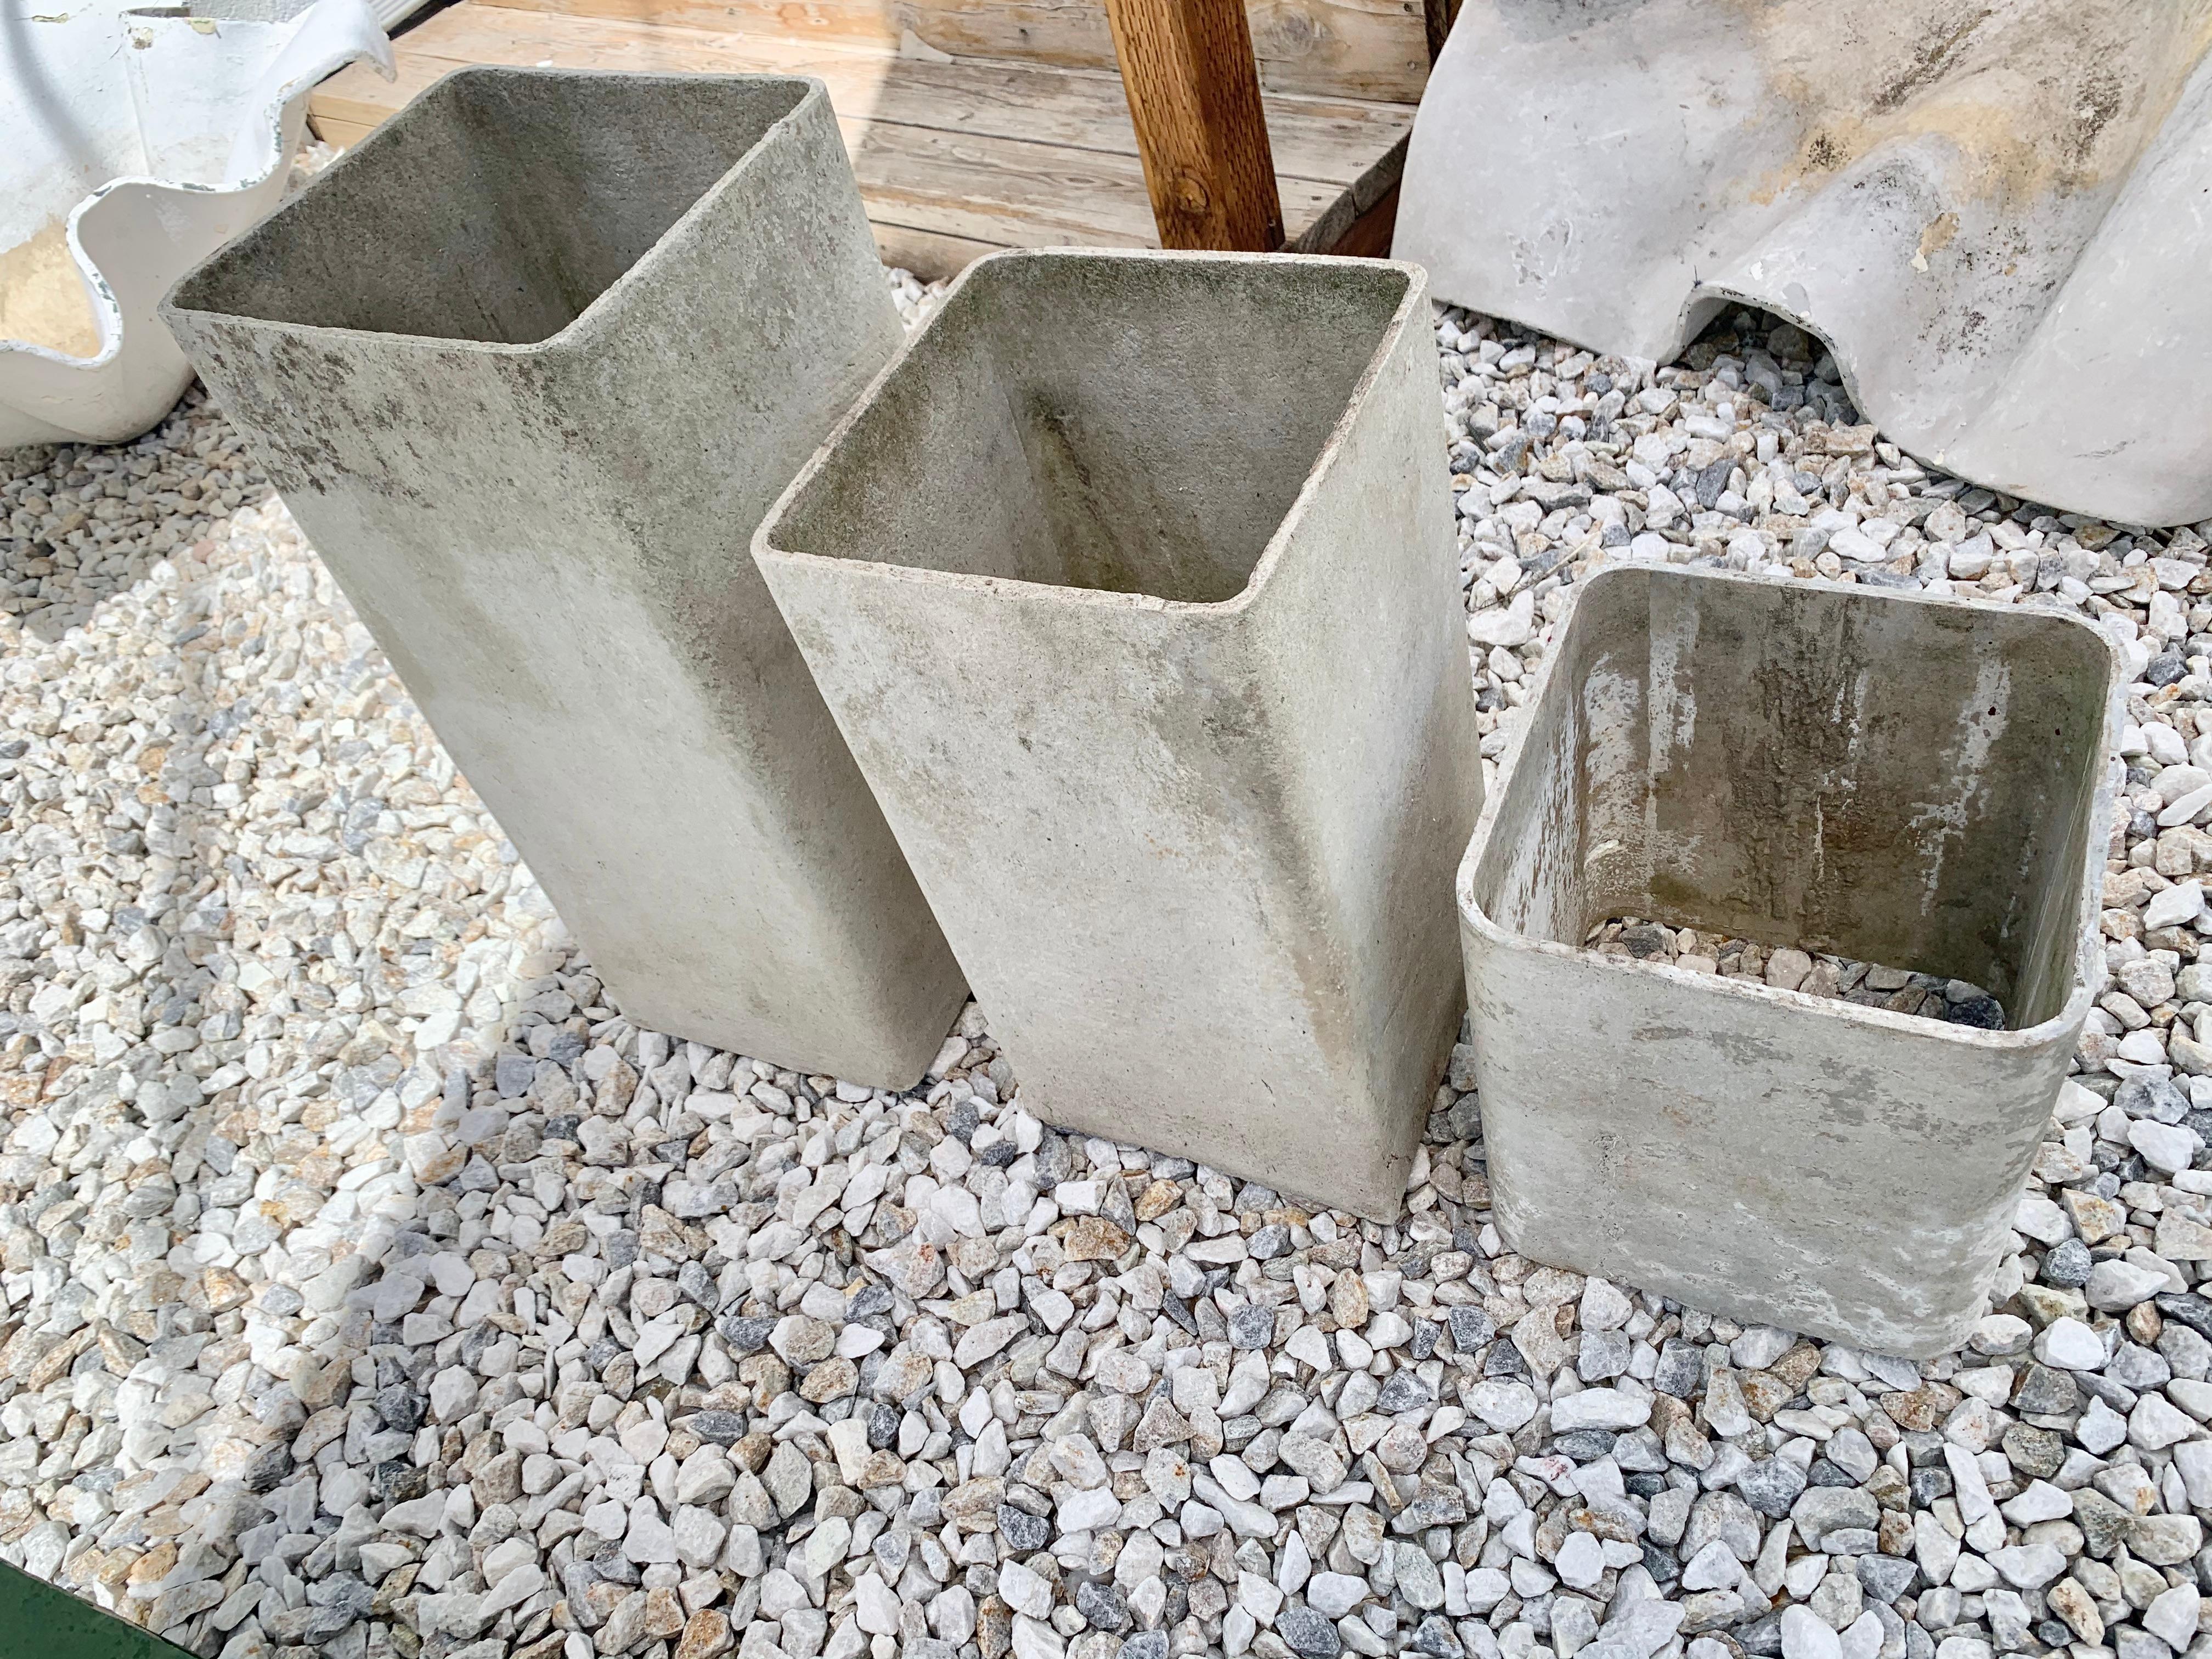 Unique set of three concrete planters by Swiss architect Willy Guhl. Rectangular planters with hollow bottom. Perfect for planting directly into the ground. Could also be used to hide unsightly pipes or hoses outside. Super functional piece of Willy